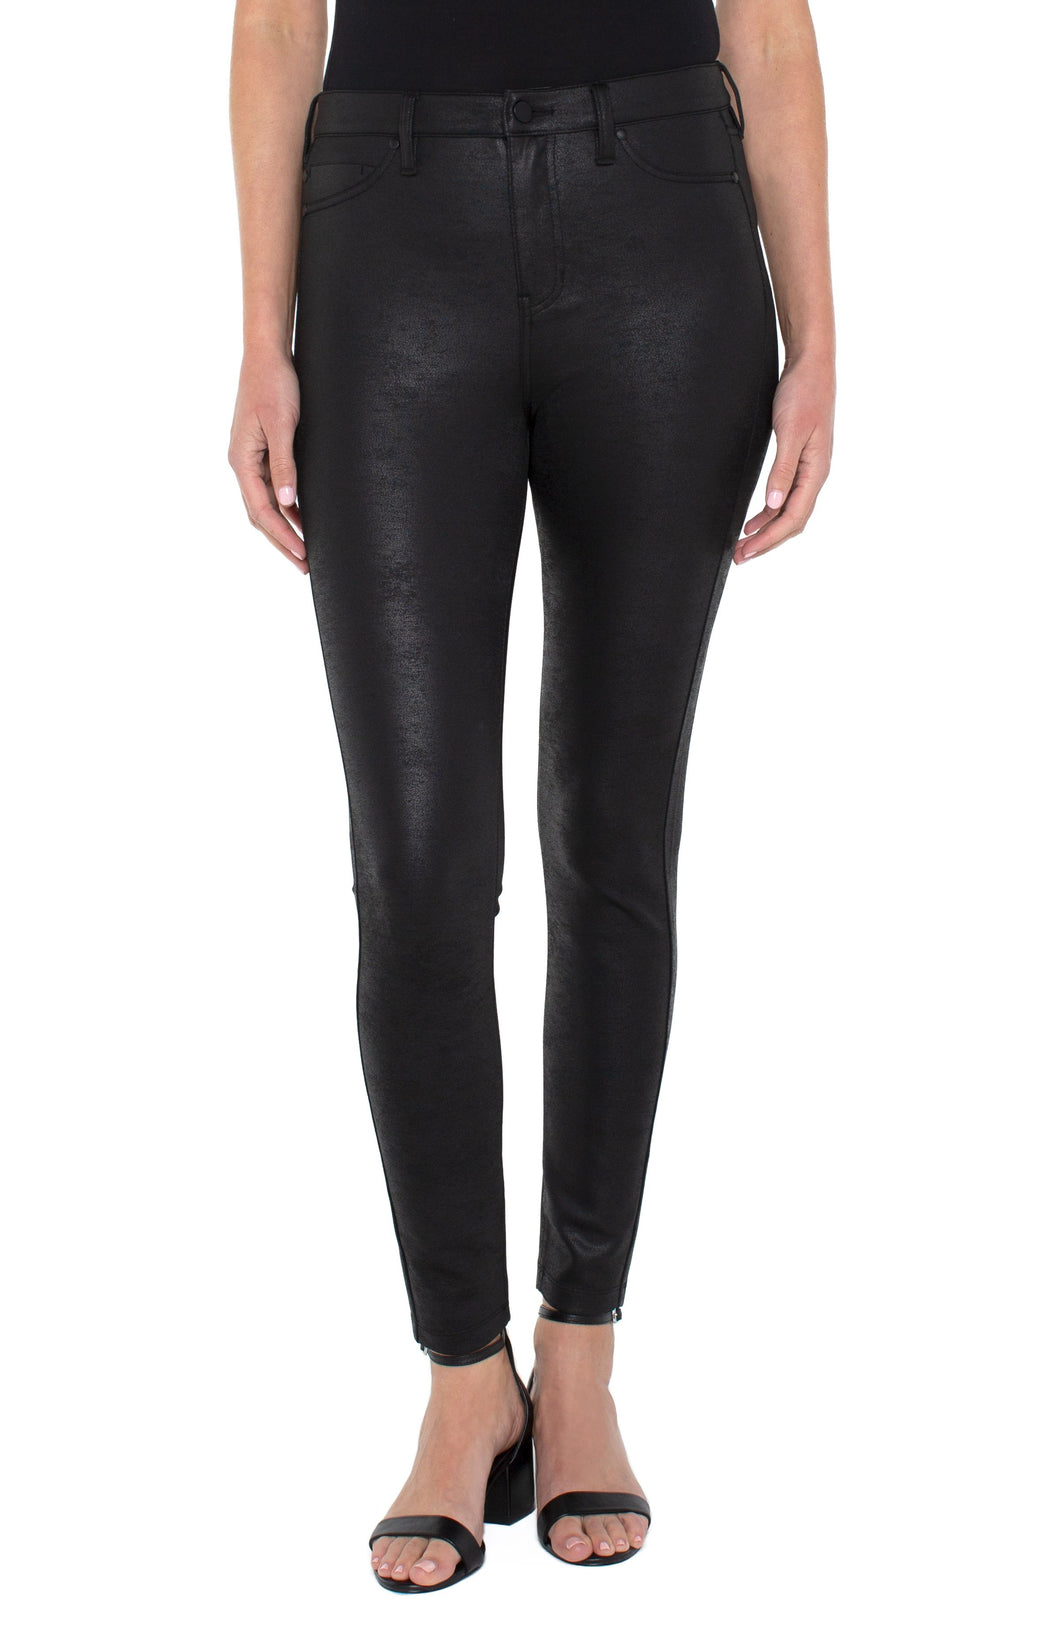 The signature Madonna legging in a black coated knit offers a classic look with a bit of edge with its subtle shine! Unique and classy, these leggings will look stunning paired with any top. Incredible comfort, the Madonna legging fits true to size, stretches with every movement but has fabulous recovery and does not end up bagging.  Stand out in a crowd with these attention-grabbing leggings! You will not be disappointed!  Color- Black. 29'' Inseam. Hi-rise.